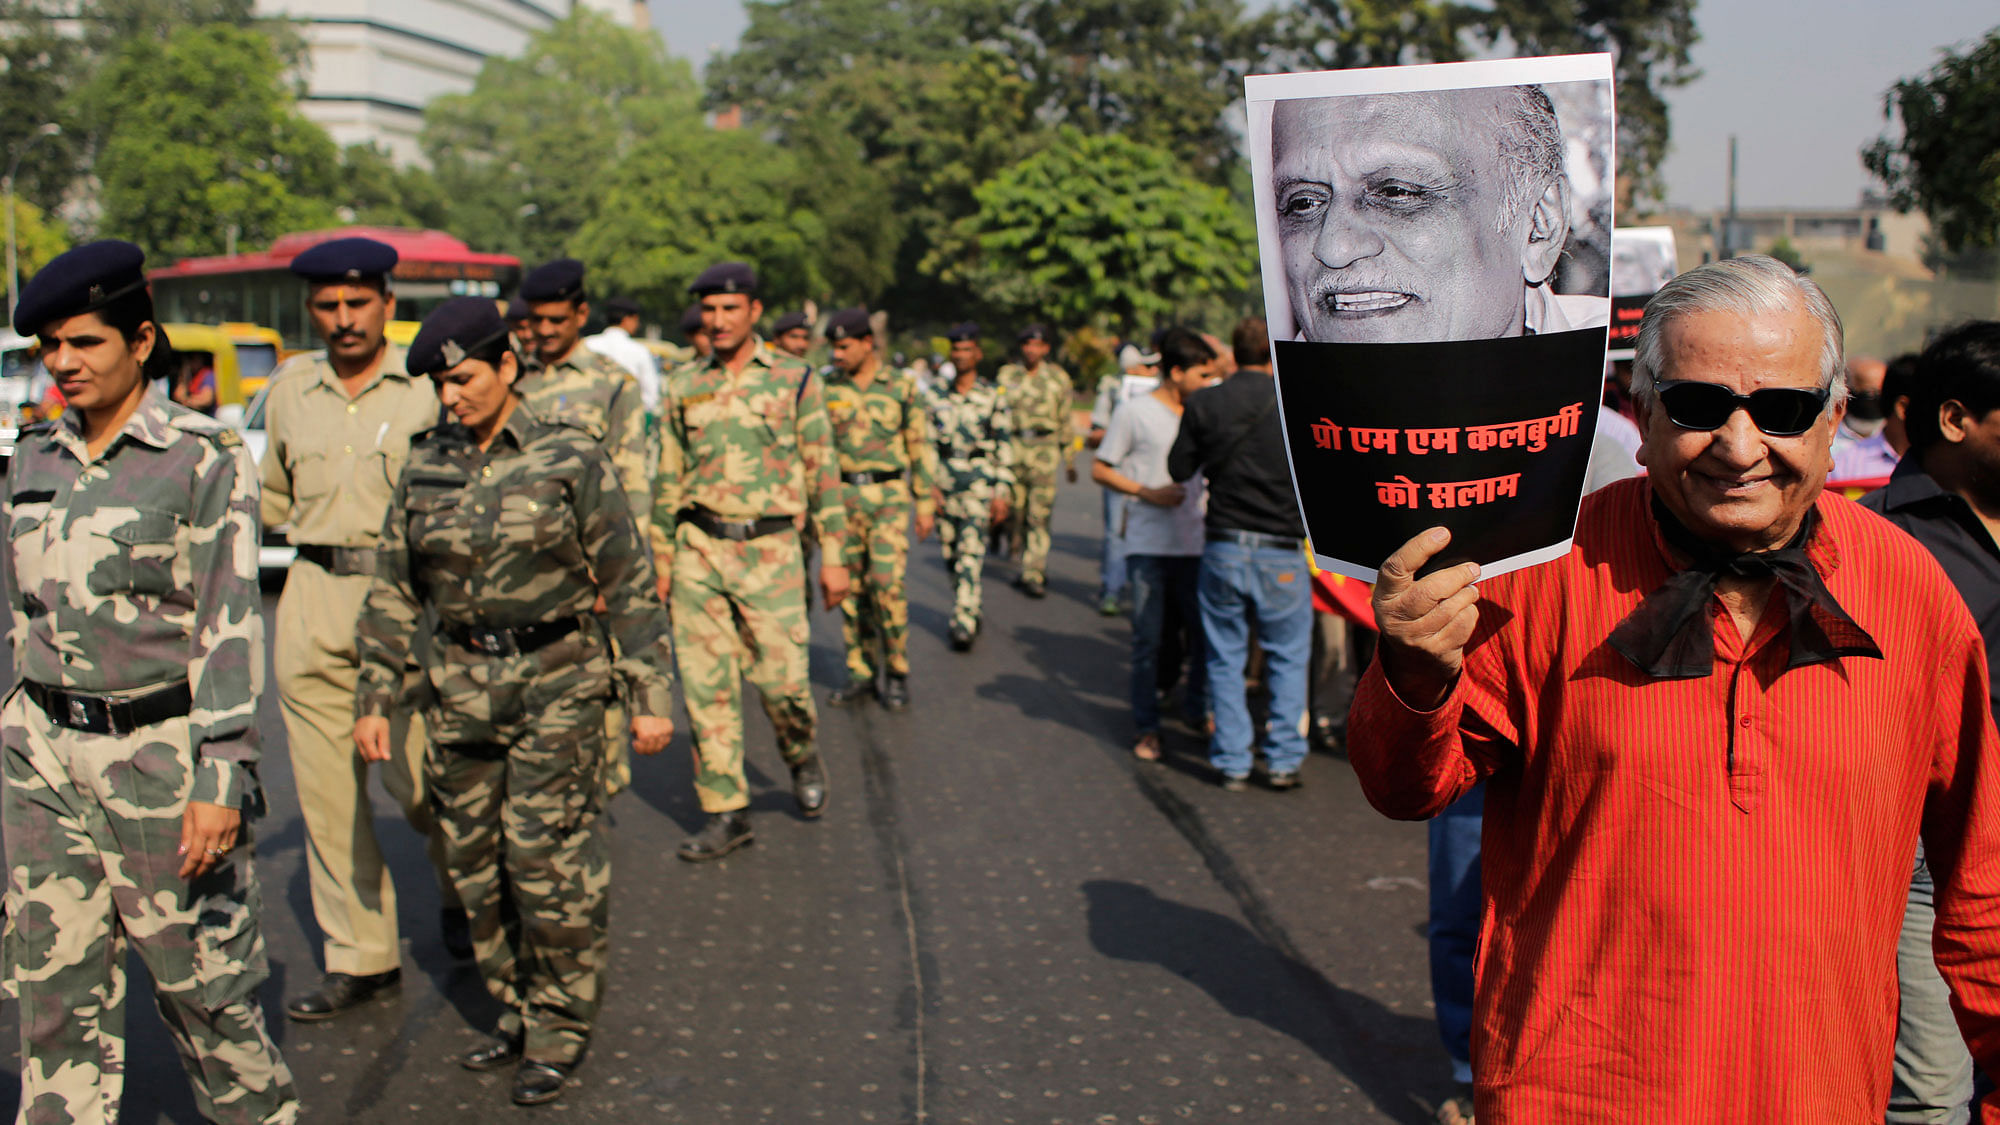 Writers protests against MM Kalburgi’s murder and the rising intolerance in the country. (Photo: AP)